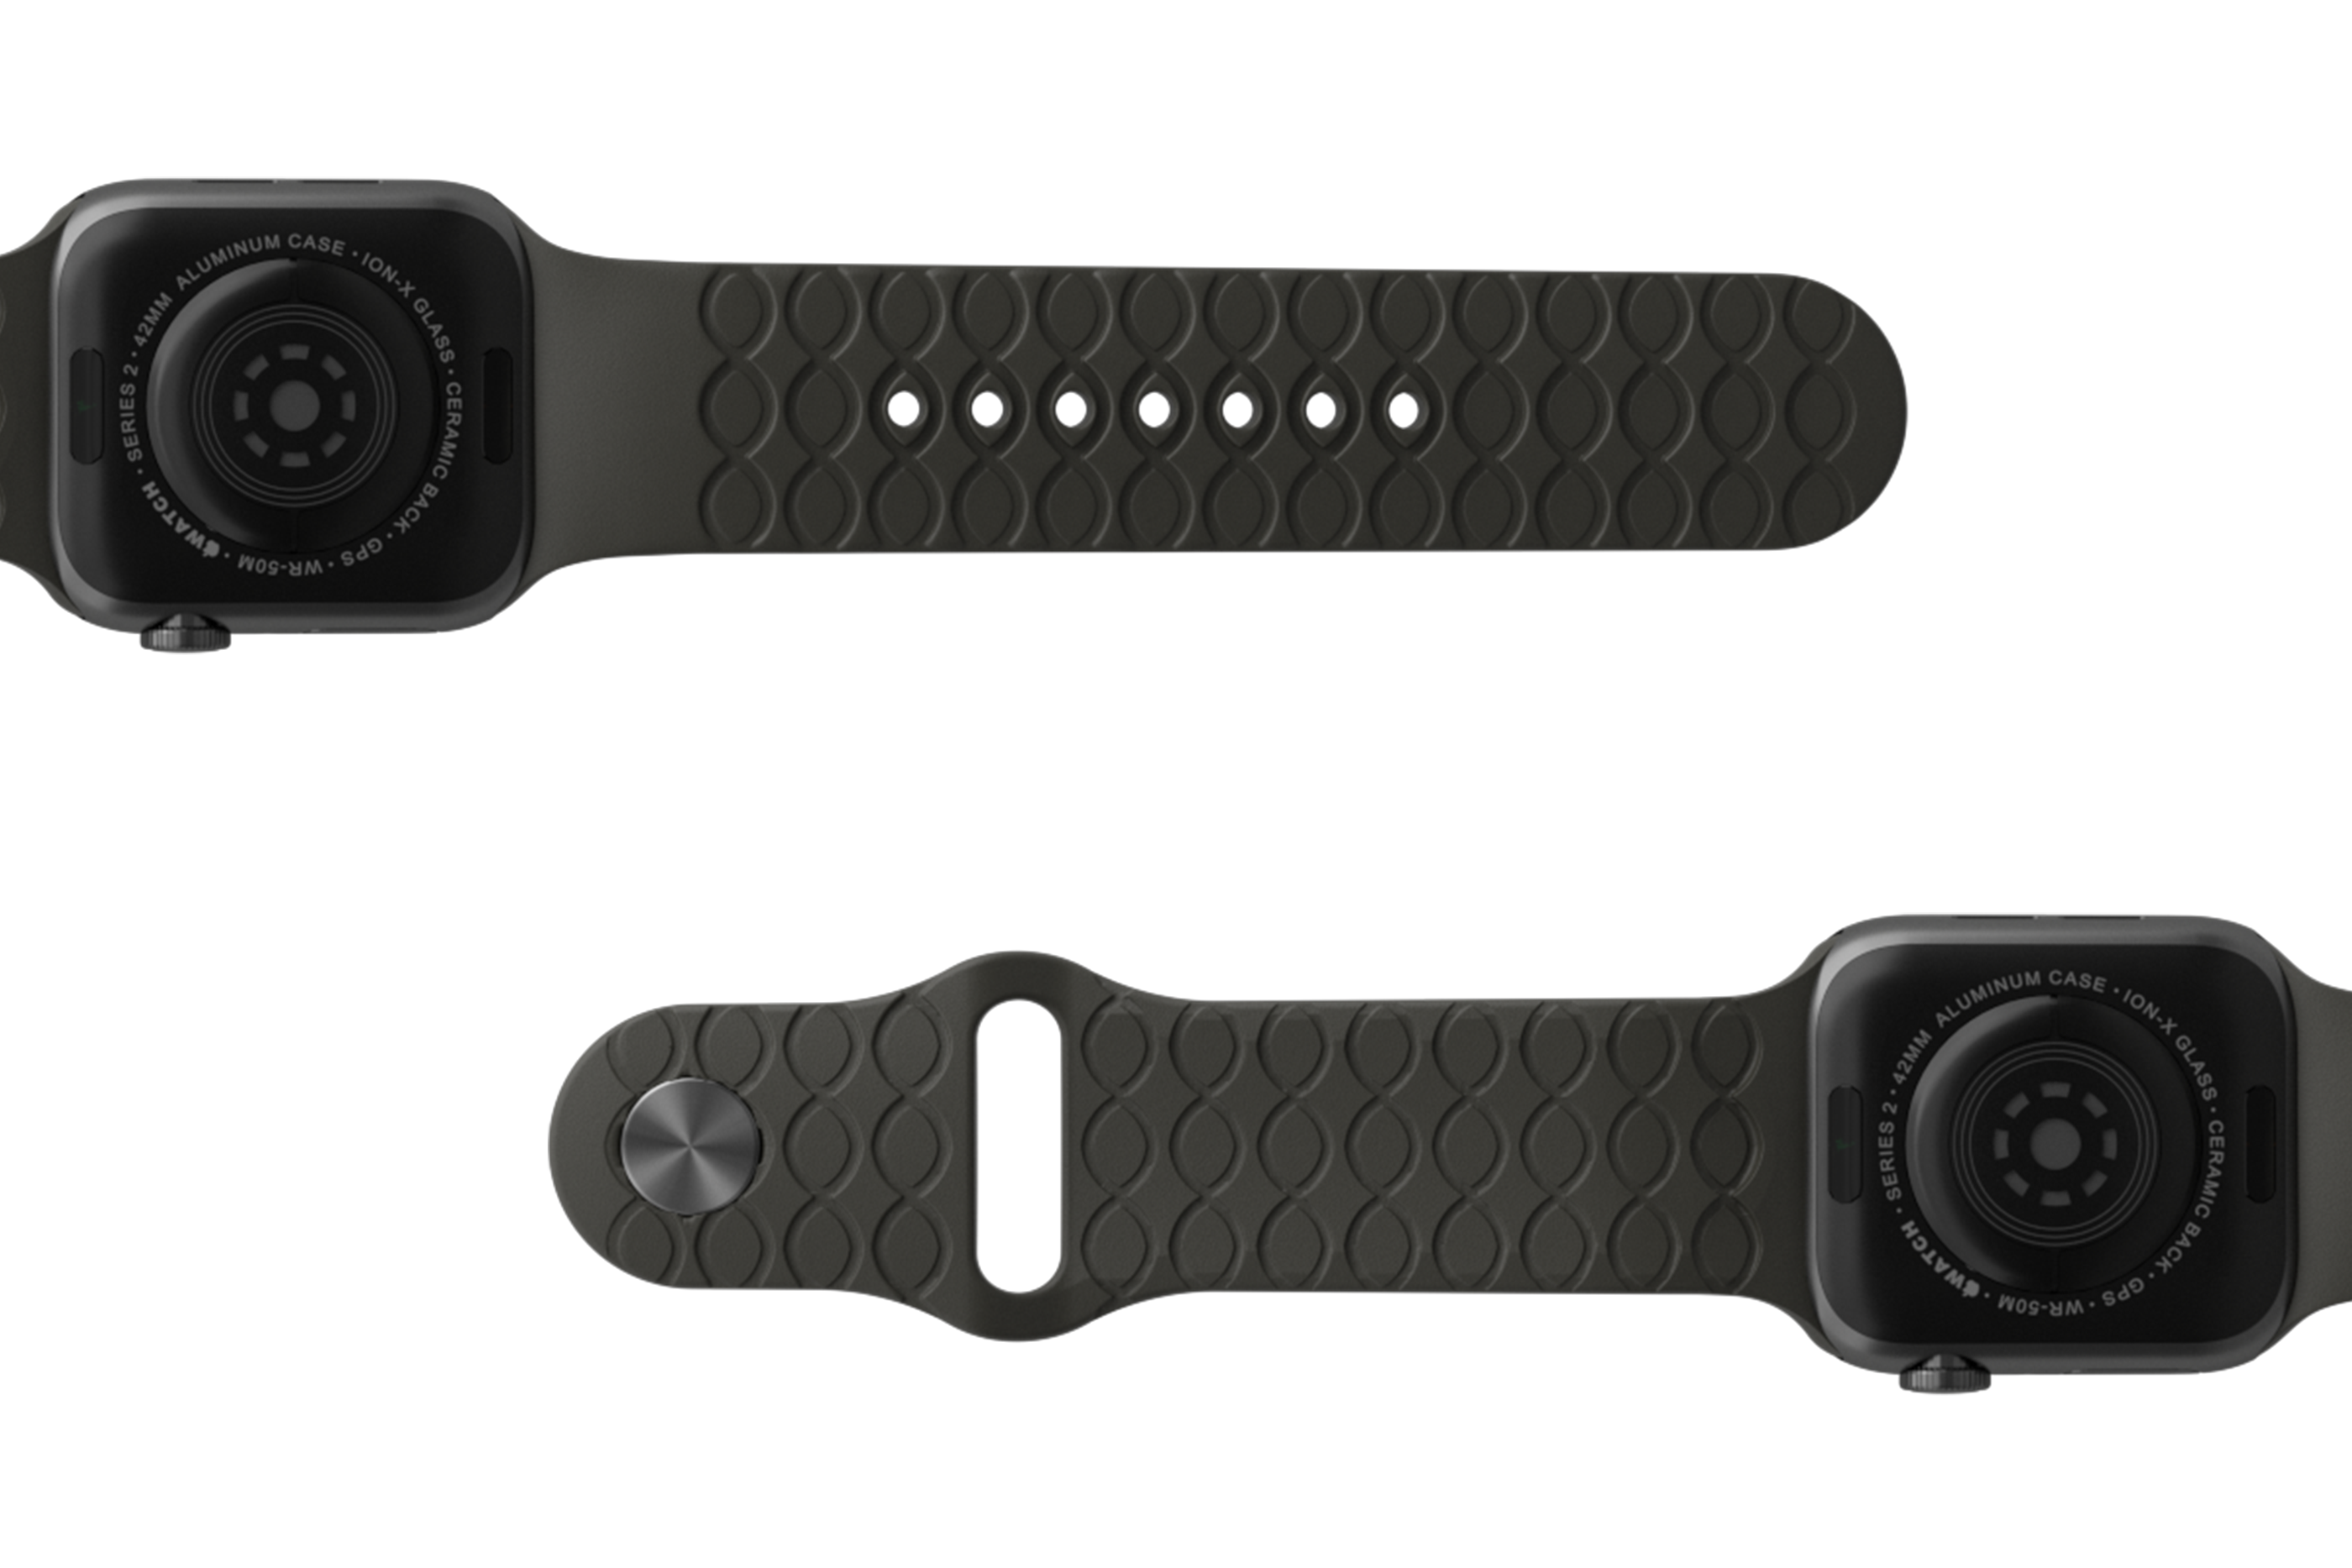 Solid Black Apple watch band with gray hardware viewed bottom up